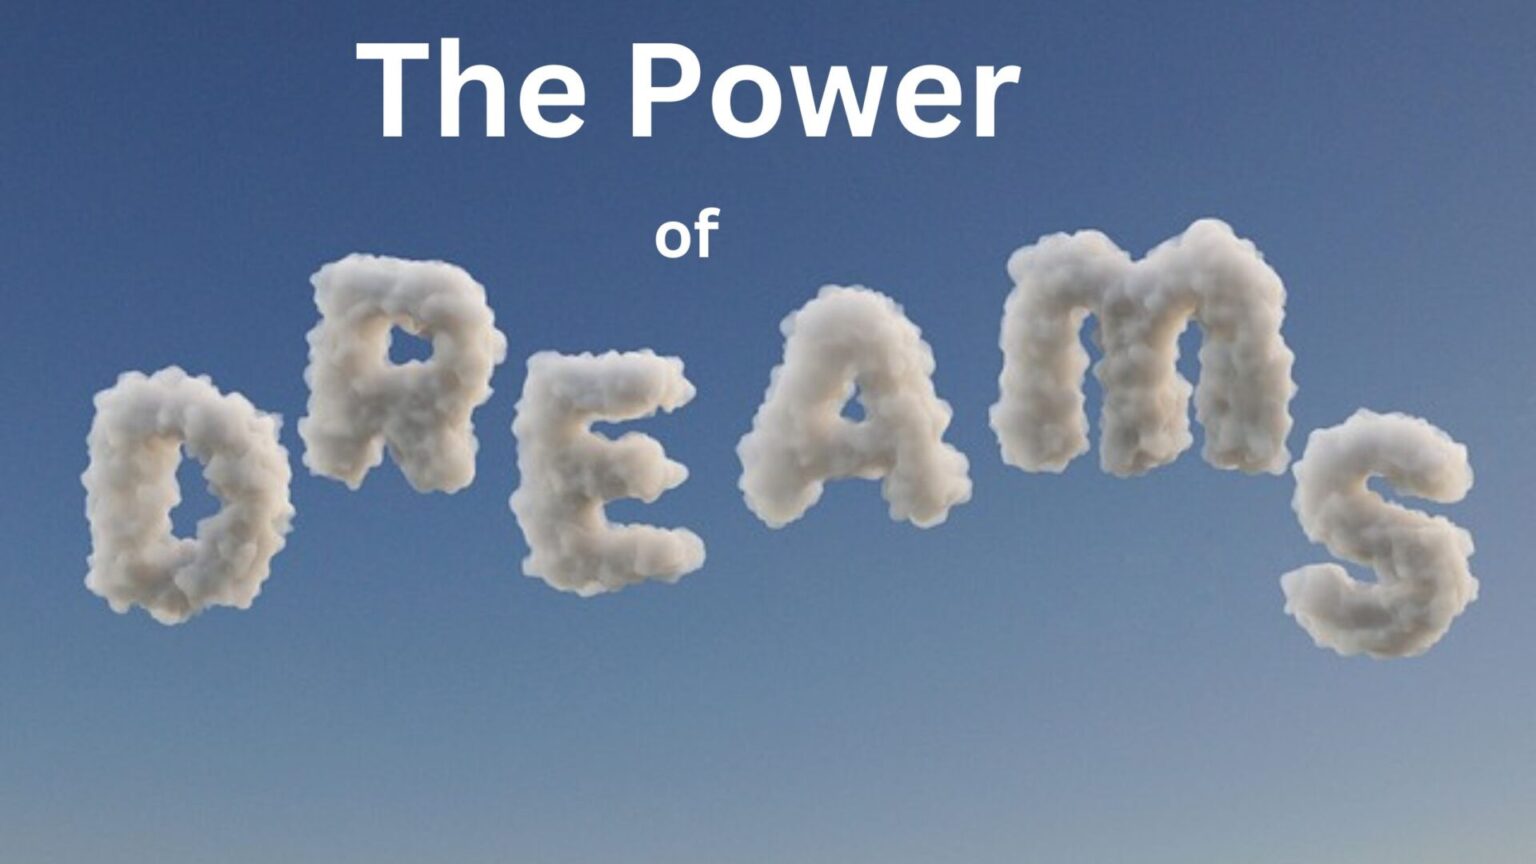 The power of dream